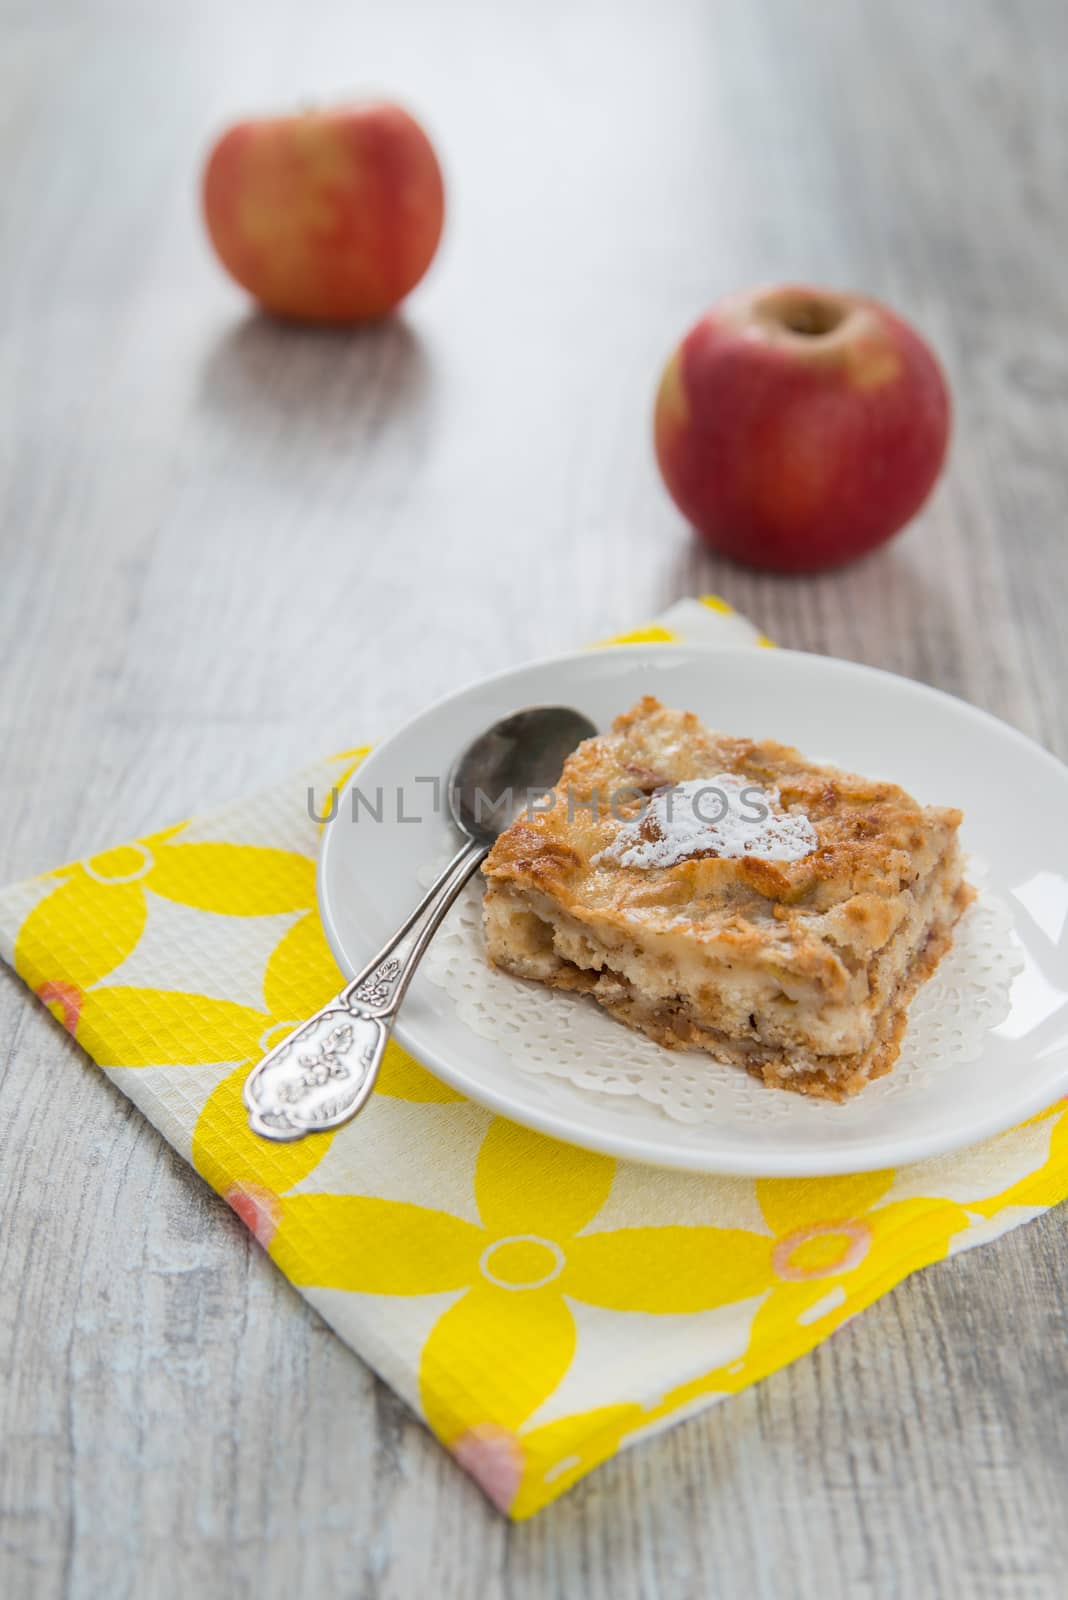 Piece of an apple pie by Linaga